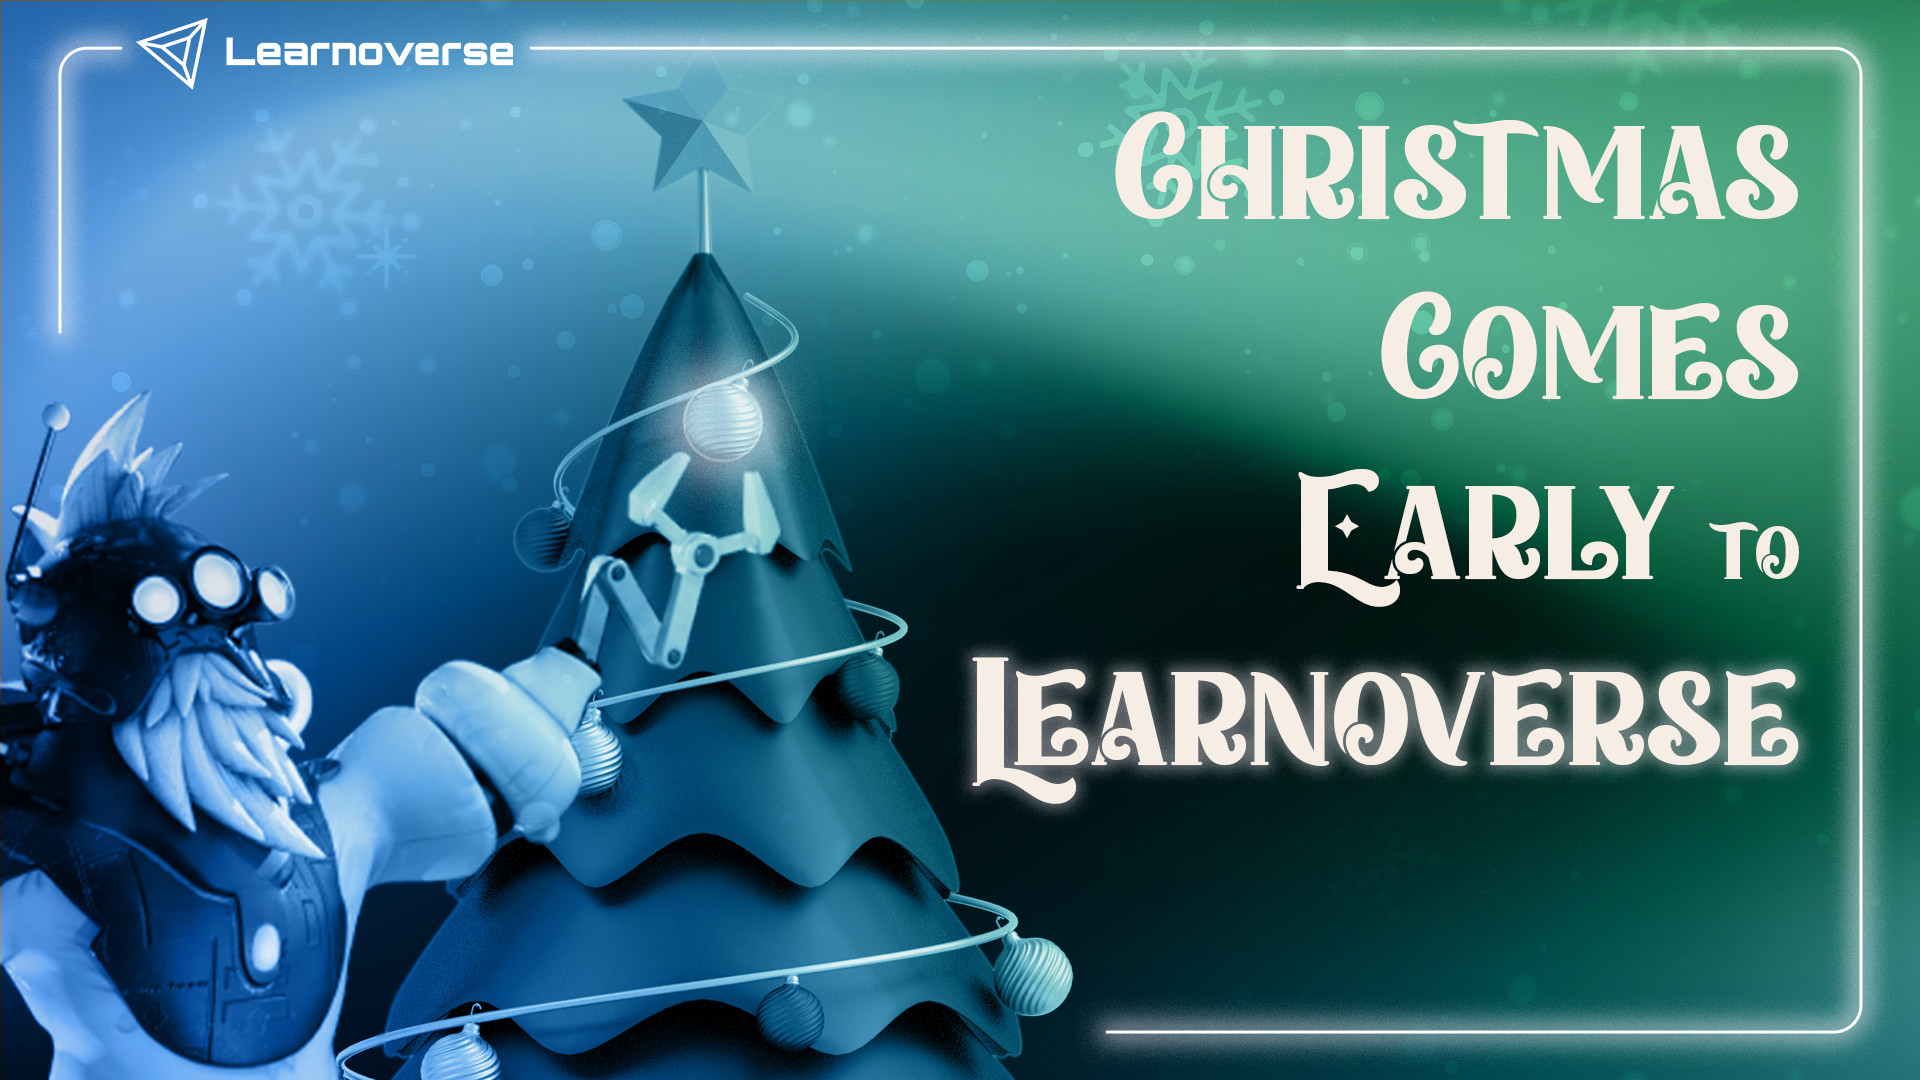 Christmas Comes Early to Learnoverse article thumbnail